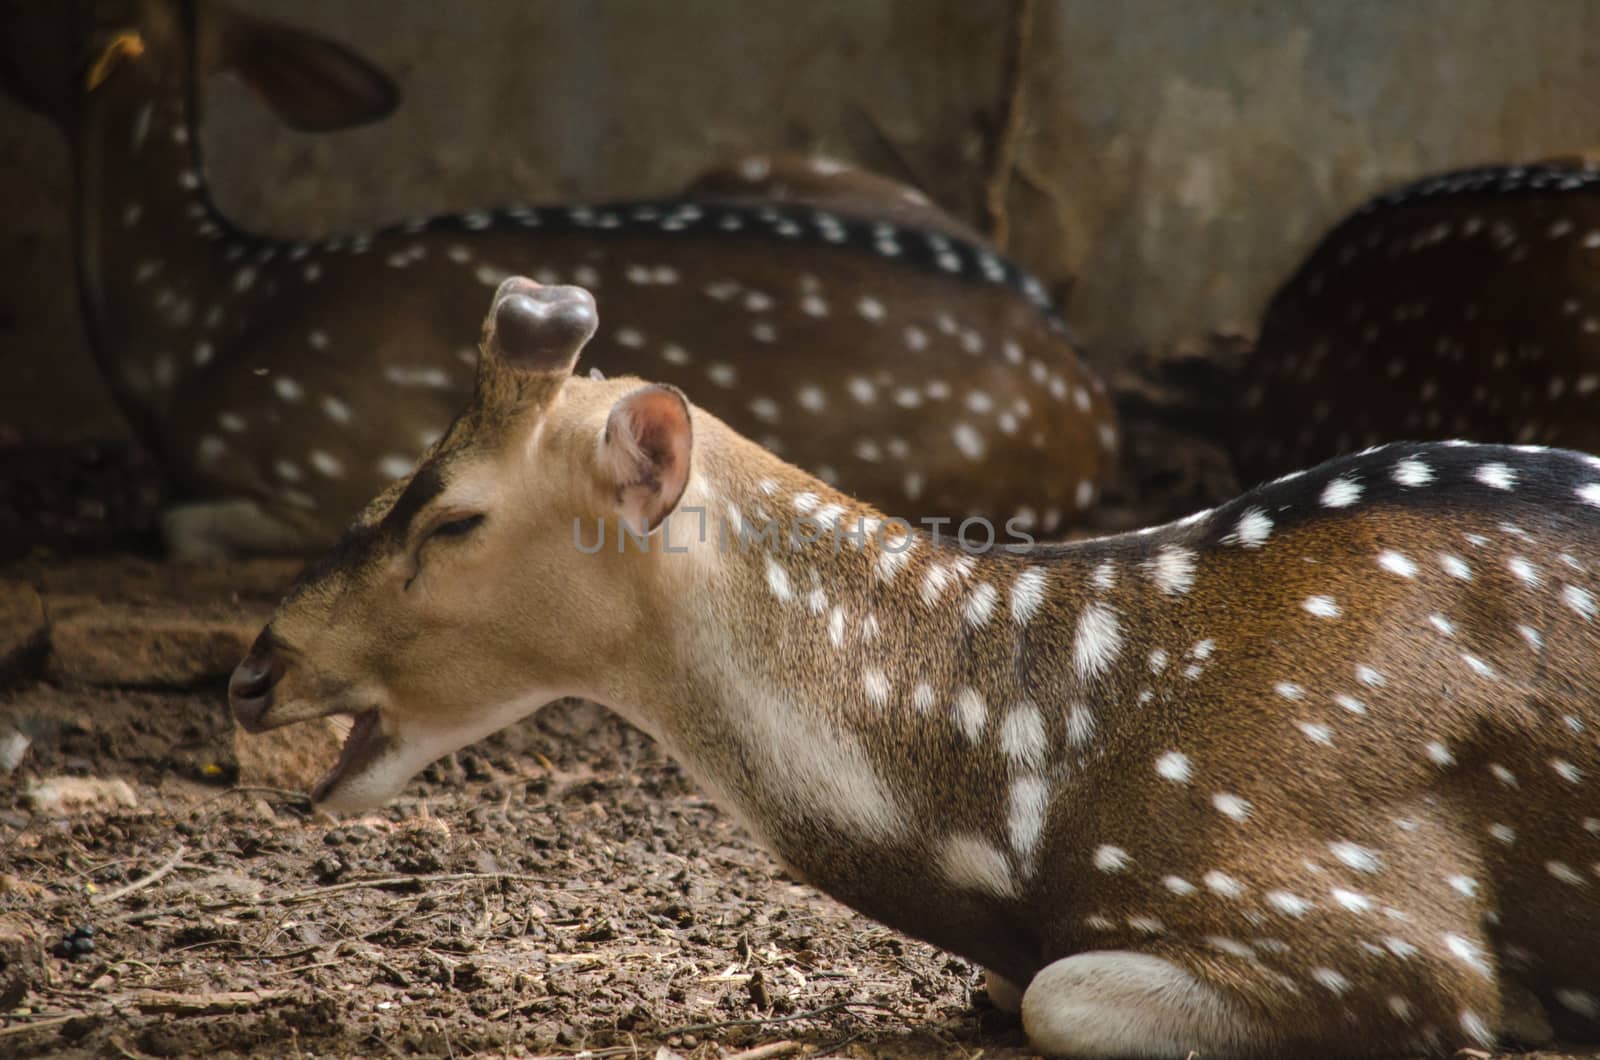 Chital or cheetal deer (Axis axis), also known as spotted deer or axis deer in the forest